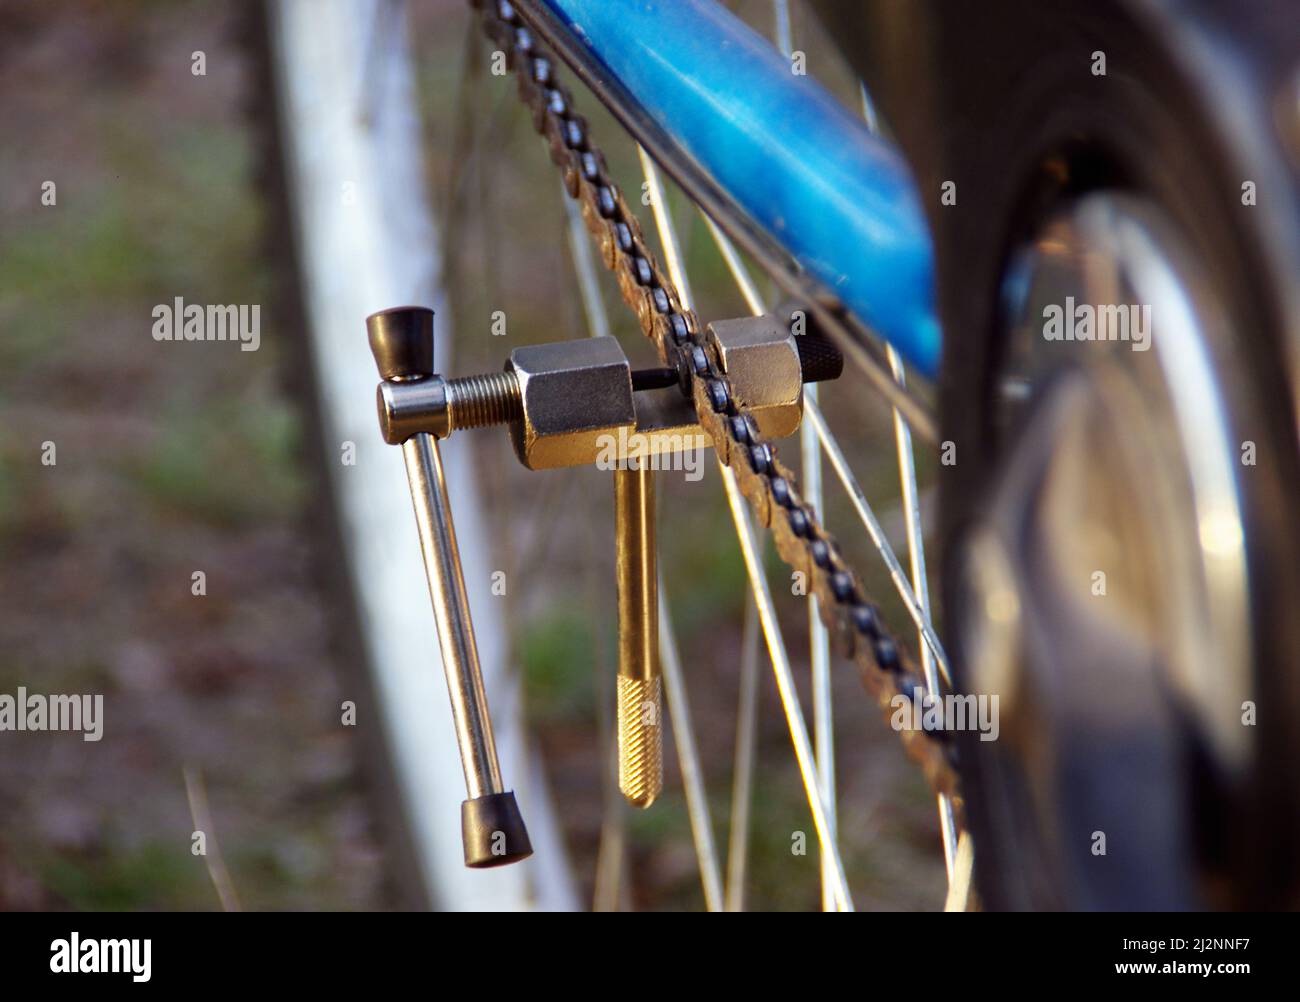 Bicycle chain repair. Maintenance and preparation for the next cycling season. Stock Photo